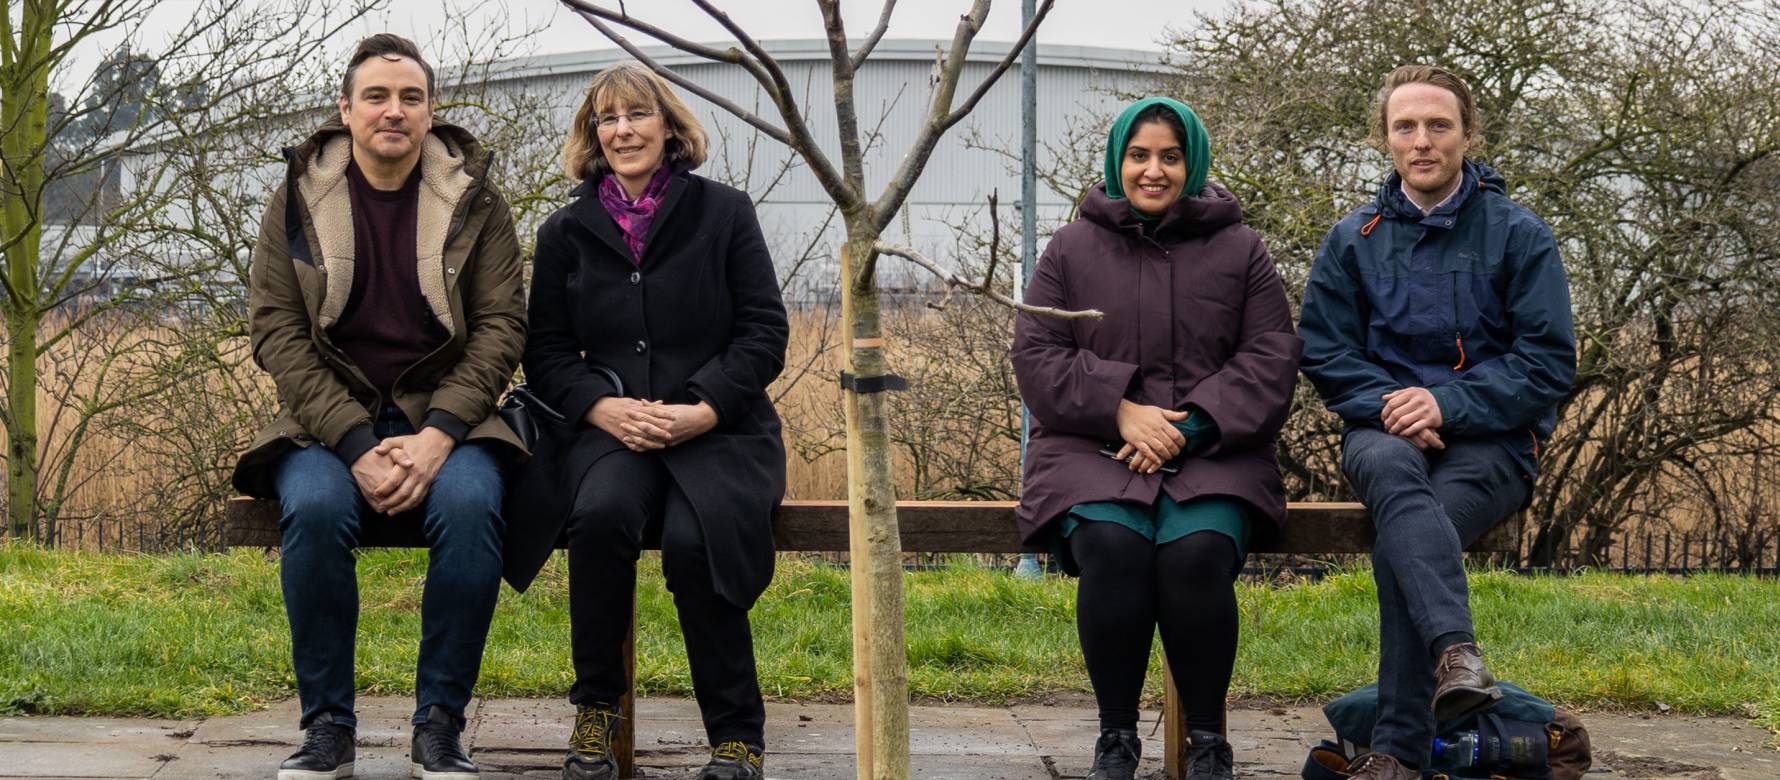 Four people sitting on a bench next to a newly planted tree funded by Clear Channel's re-greening and rejuvenation project